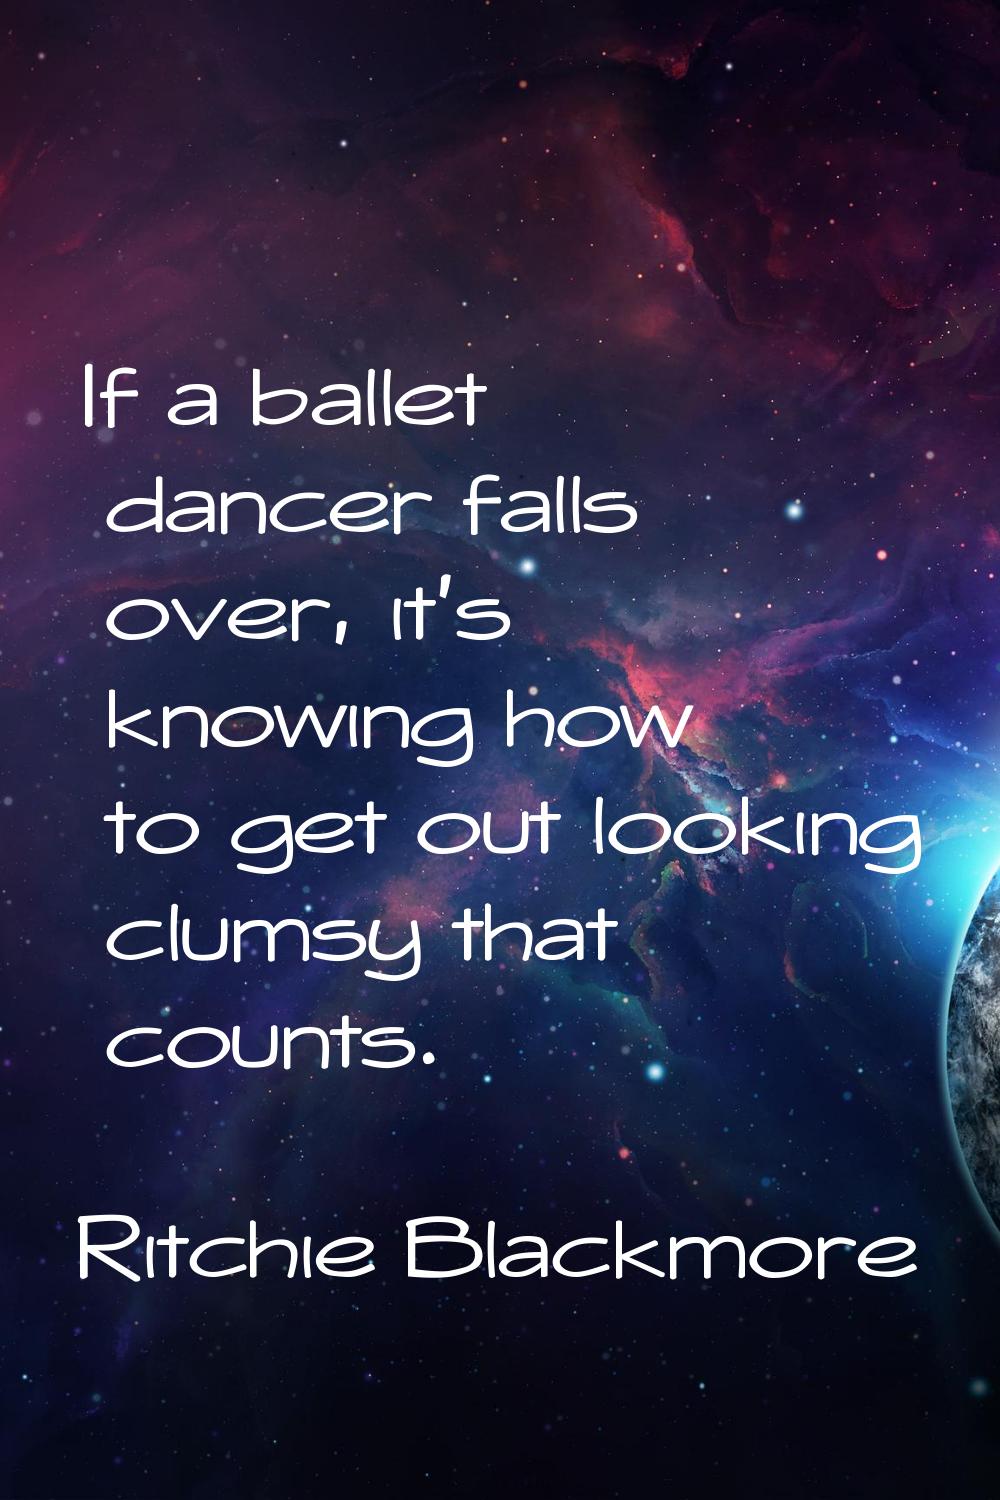 If a ballet dancer falls over, it's knowing how to get out looking clumsy that counts.